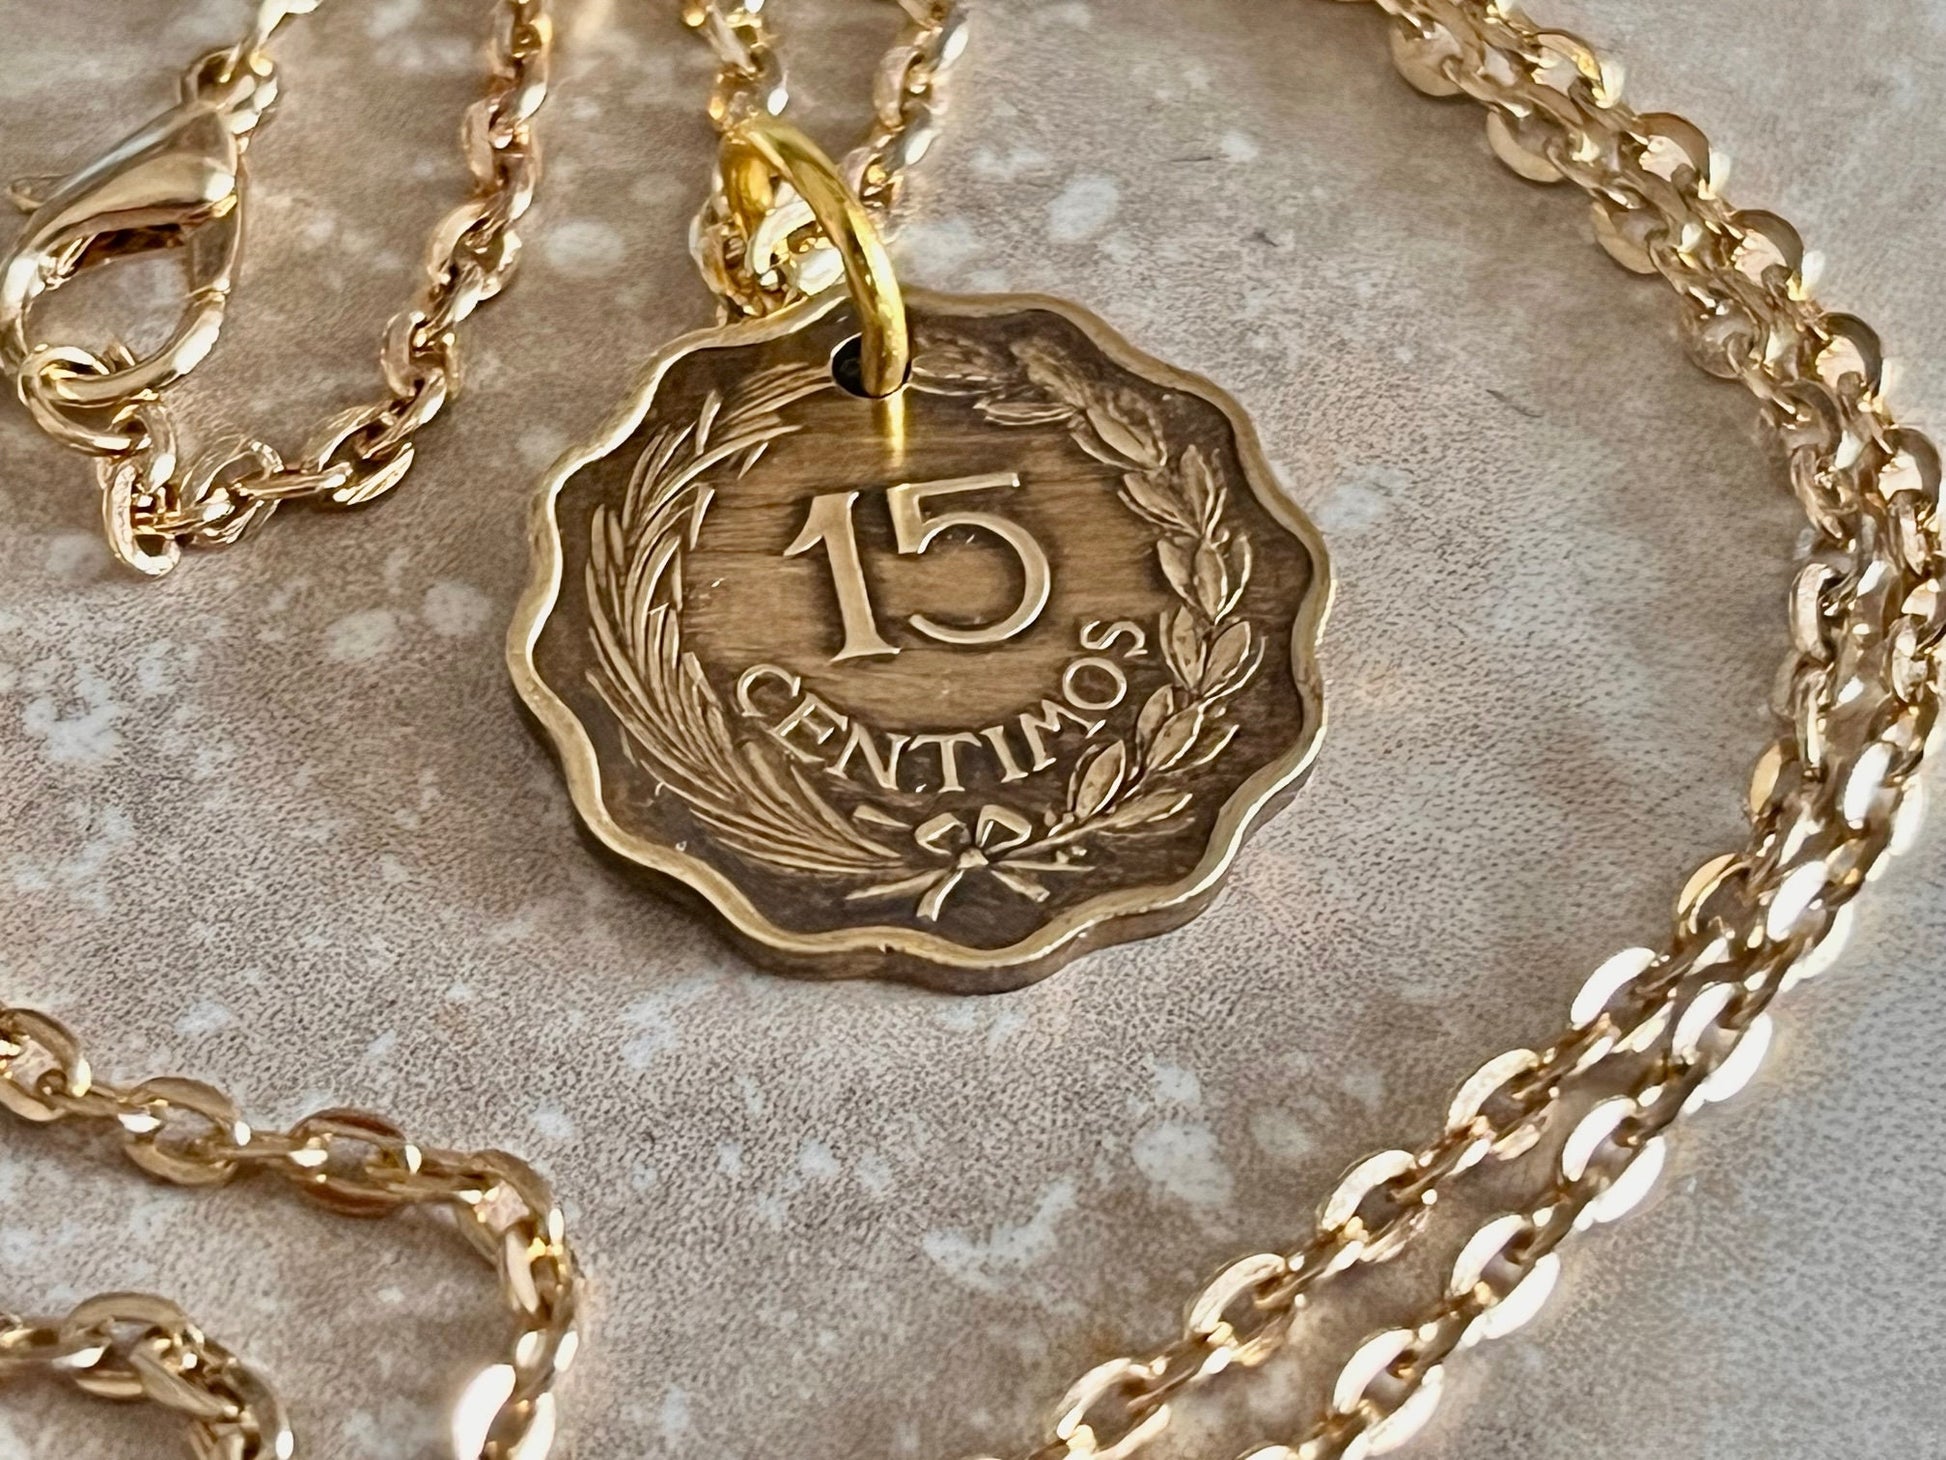 Paraguay Coin Necklace Pendant 15 Centimos Personal Handmade Jewelry Gift Friend Charm For Him Her World Coin Collector